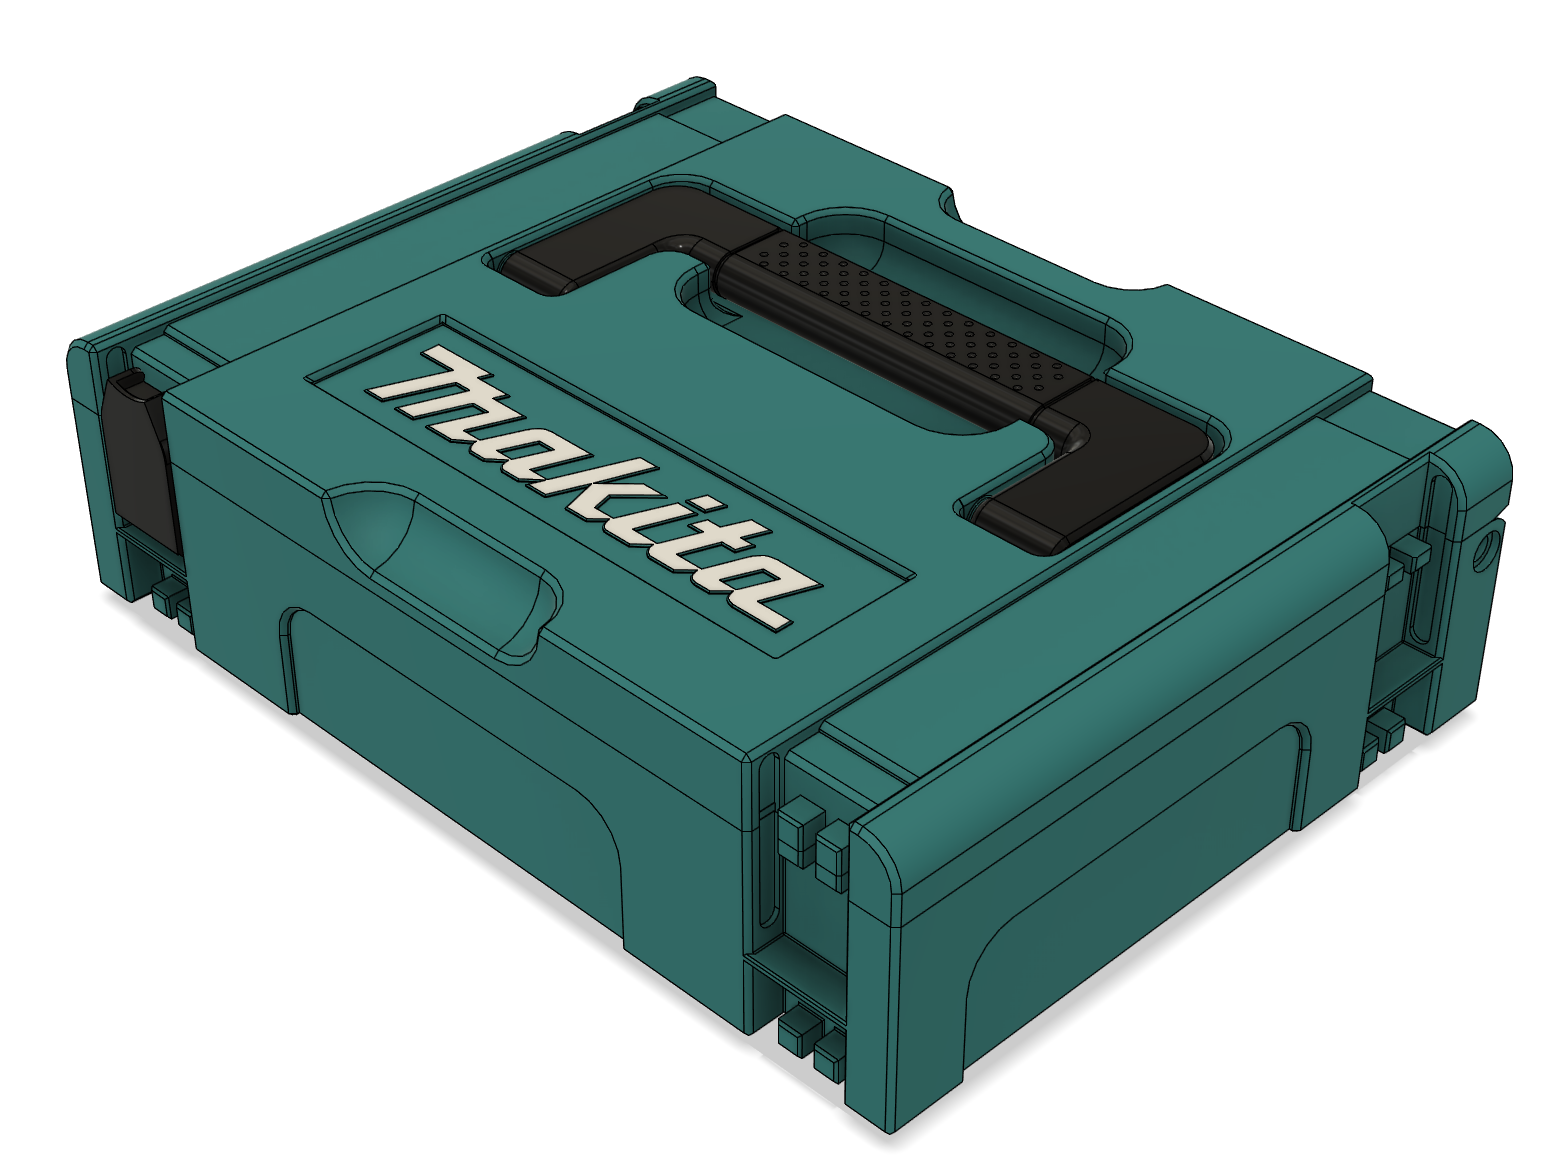 Makita MAKPAC Mini; Size 1, 2, 3 and 4 (50 % scale) by suit, Download free  STL model